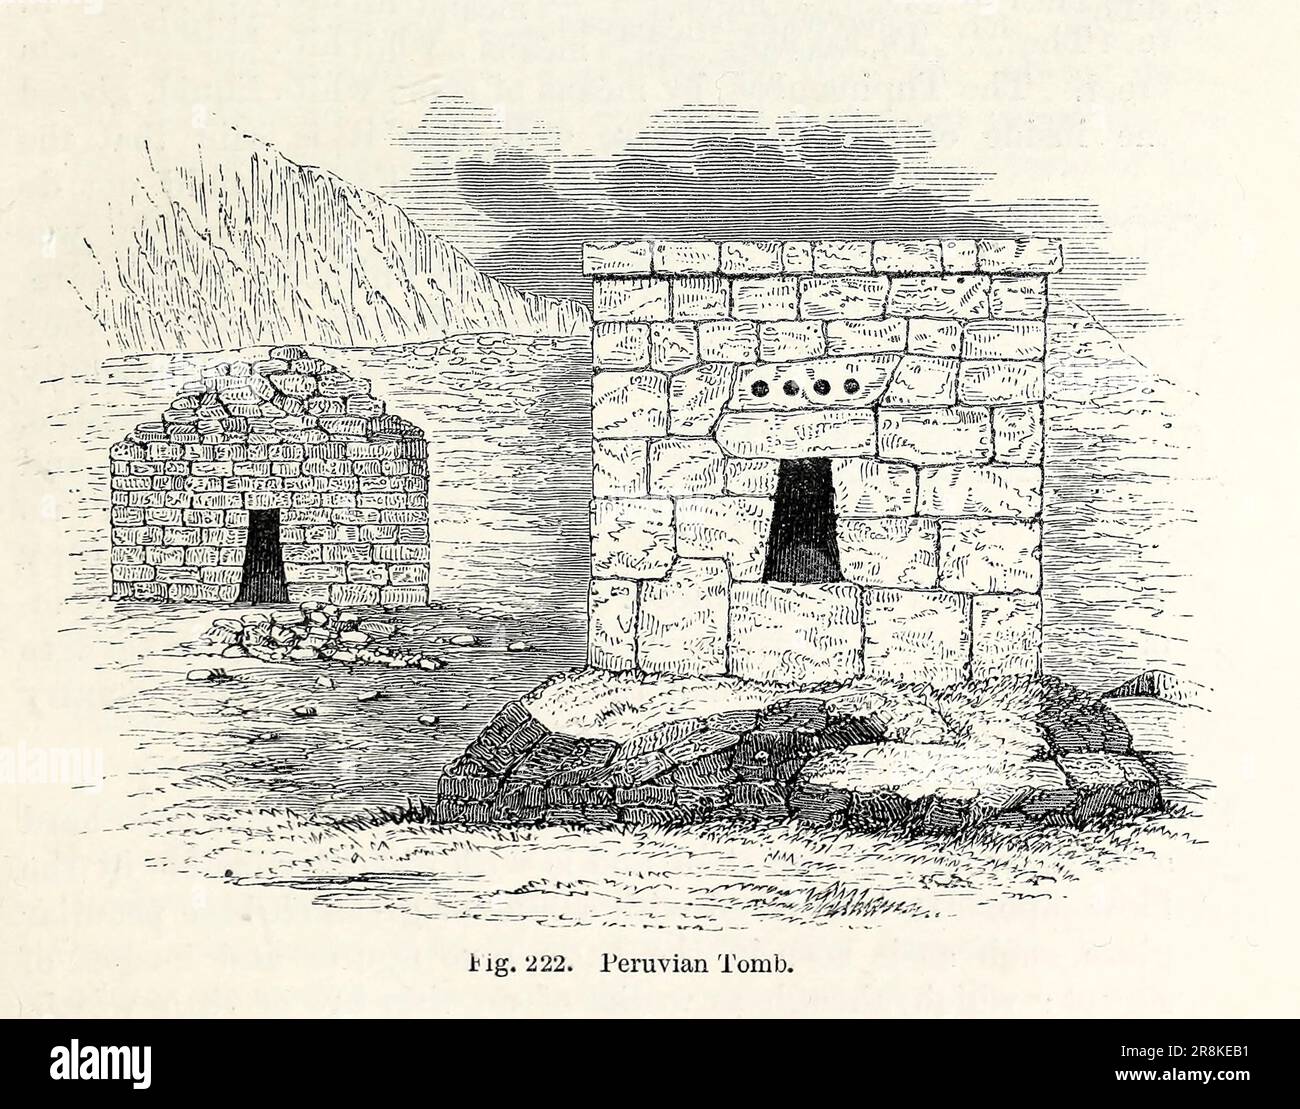 Peruvian Tomb, Peru from the book ' A history of pottery and porcelain, mediaeval and modern ' by Joseph Marryat, Published in London by John Murray, Albemarle Street in 1857 Stock Photo